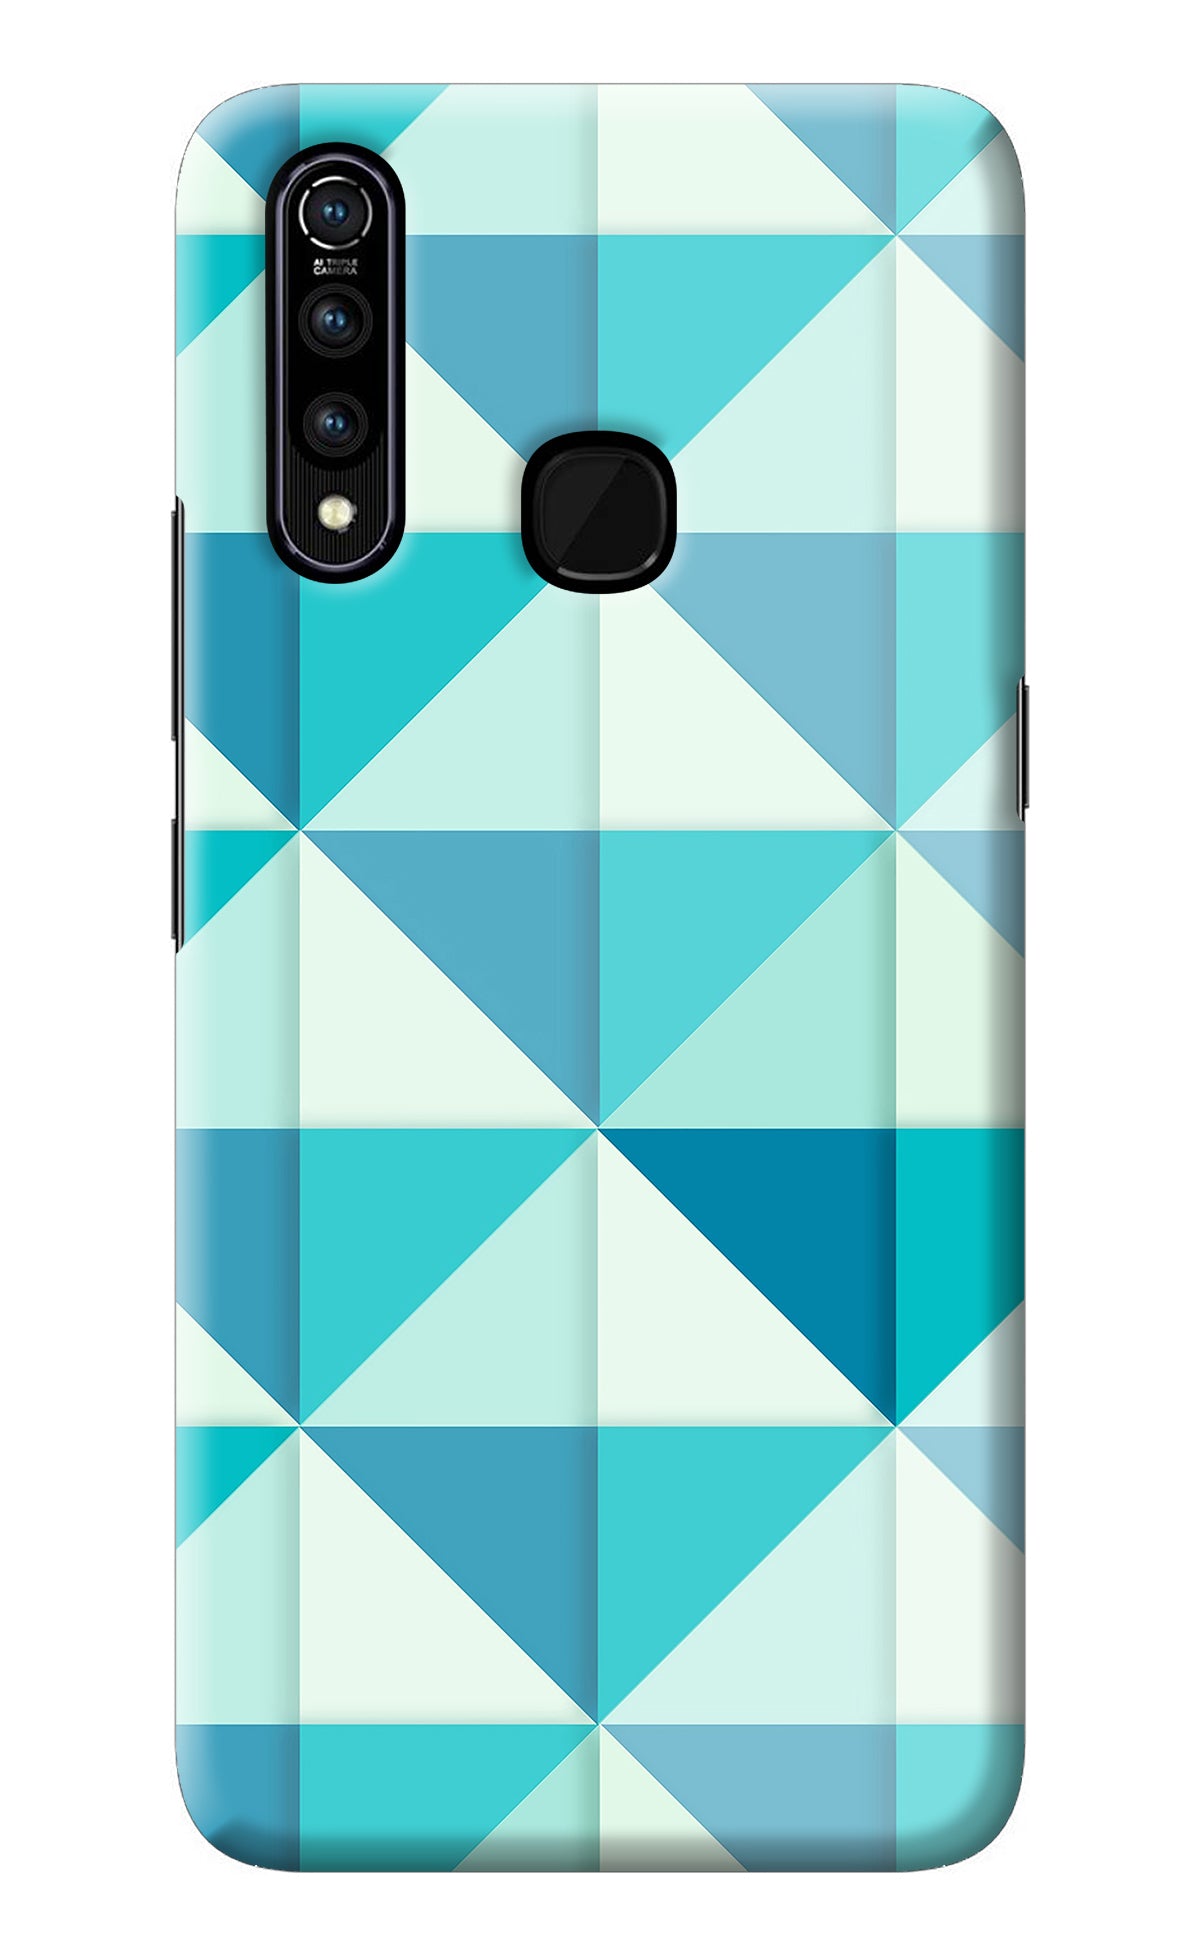 Abstract Vivo Z1 Pro Back Cover